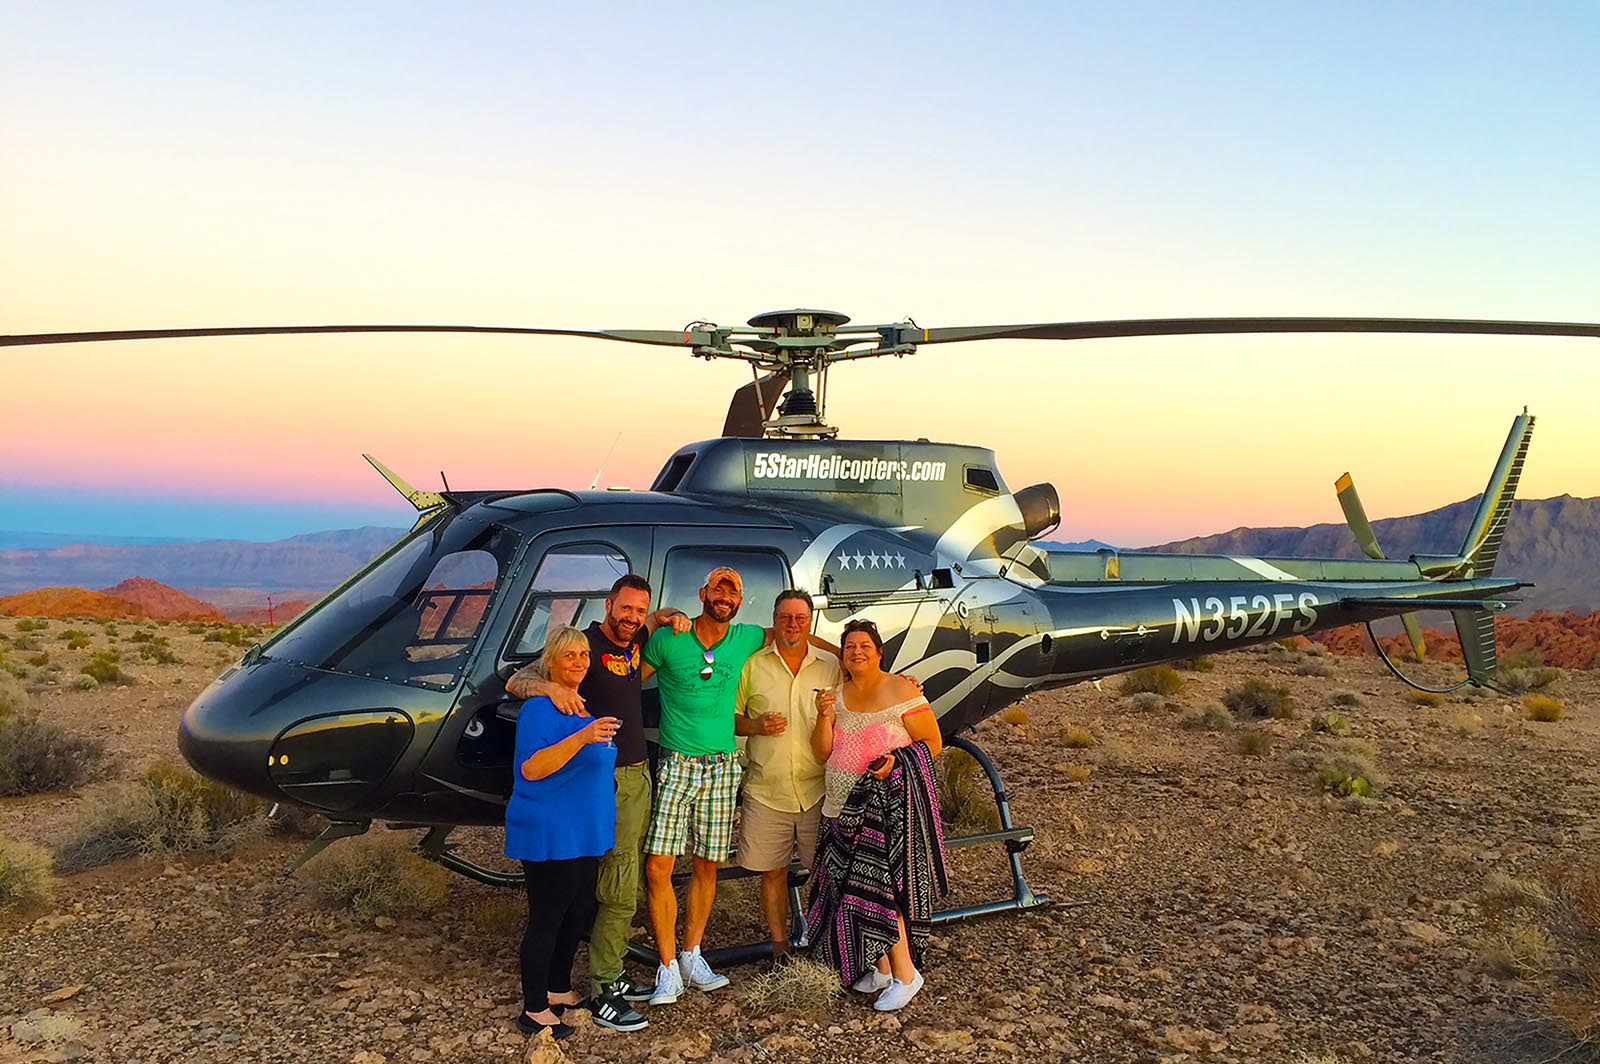 This Grand Canyon helicopter tour includes Hoover Dam, Bypass Bridge and an amazing 30 mile flight over the Grand Canyon with an exclusive VIP landing at the Valley of Fire State Park!